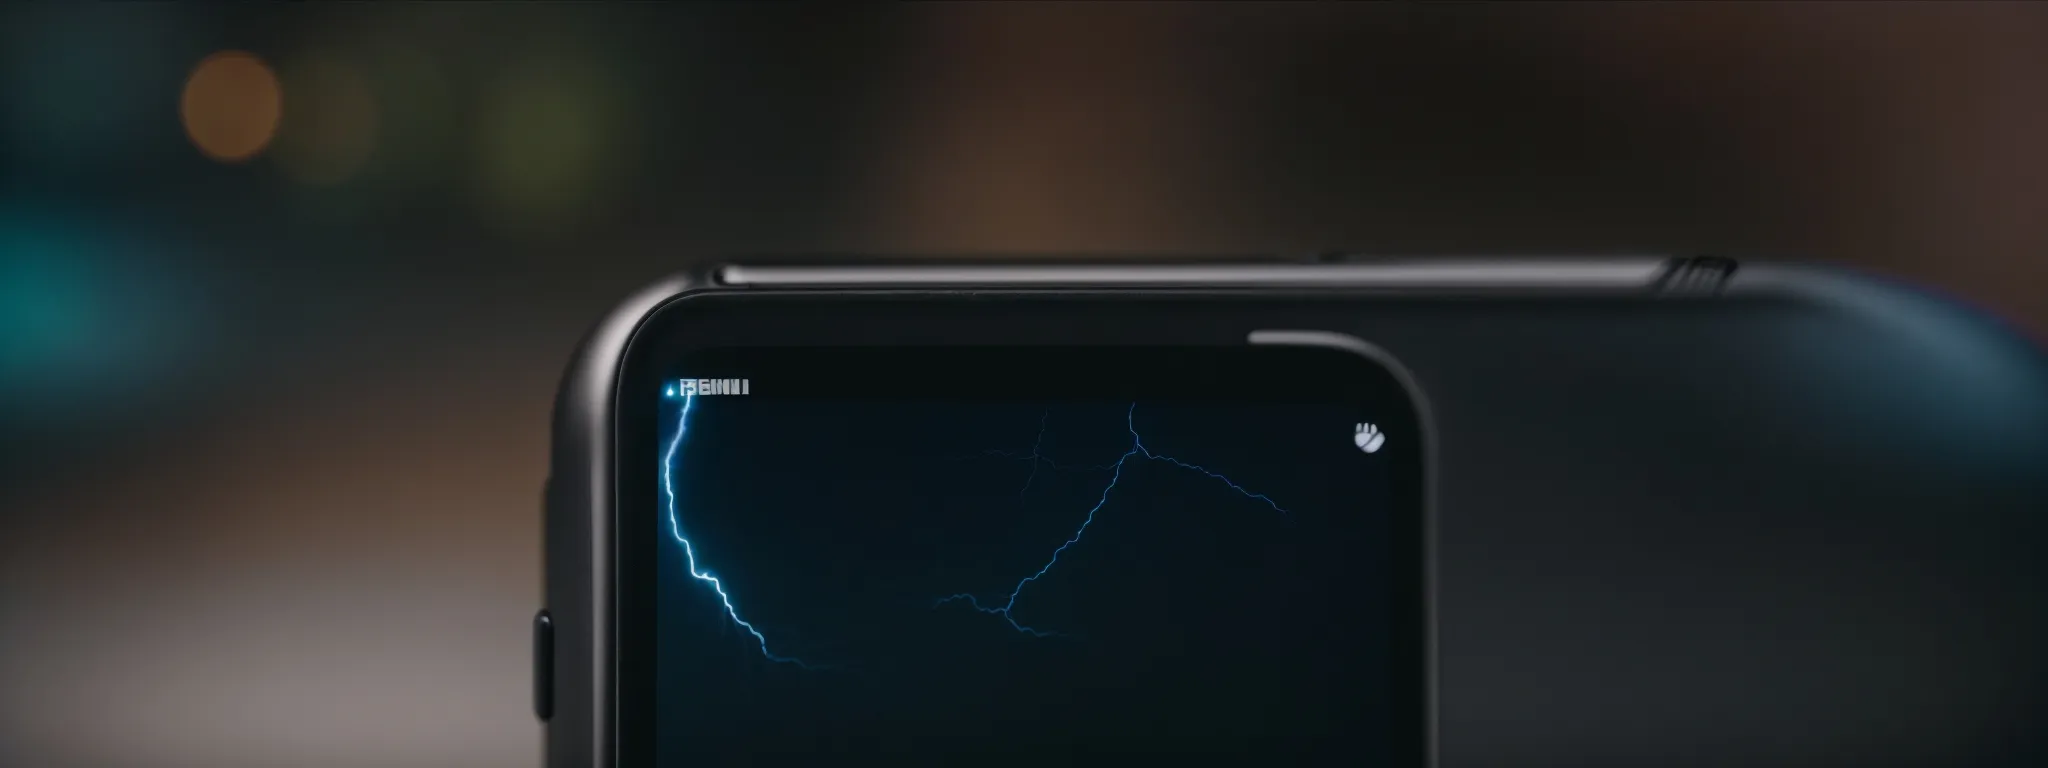 a smartphone displaying a lightning bolt icon on the screen against a blurred background.